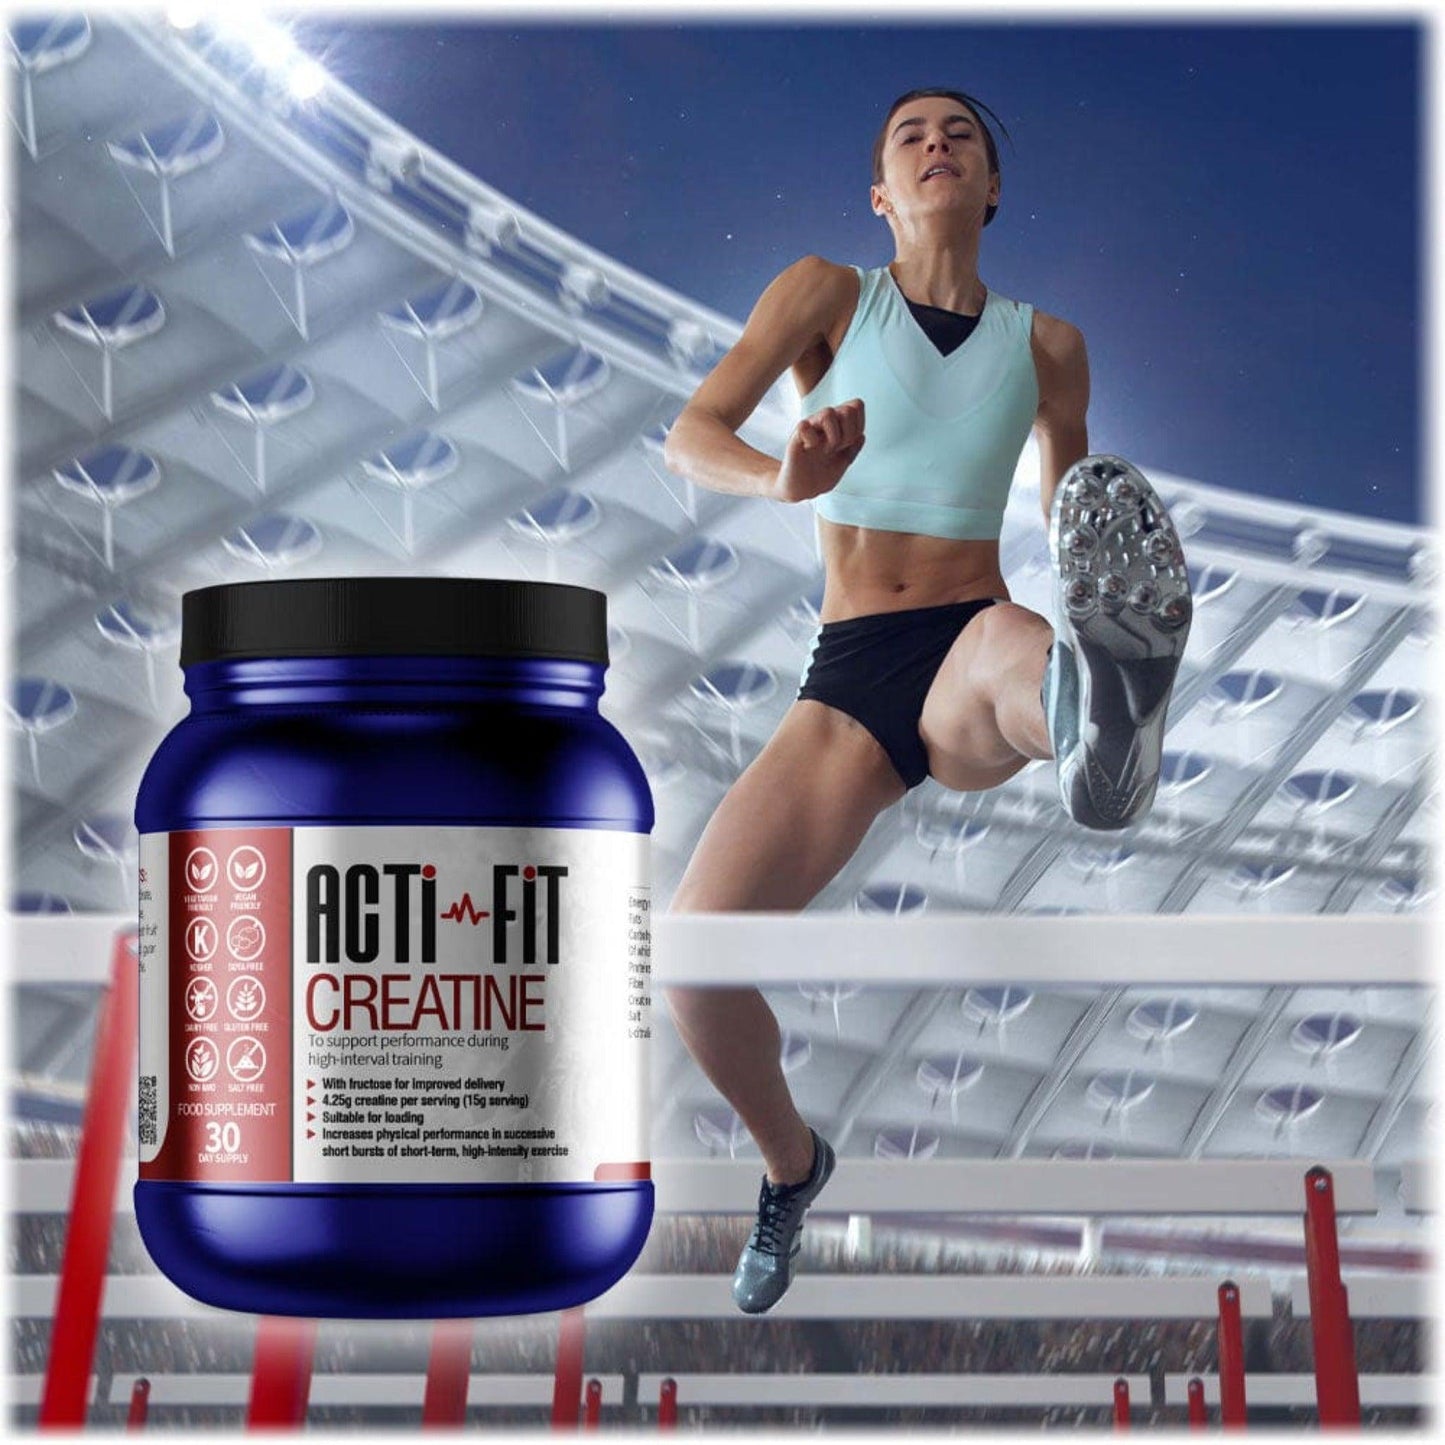 Acti-Fit's Creatine with woman competing in hurdles 